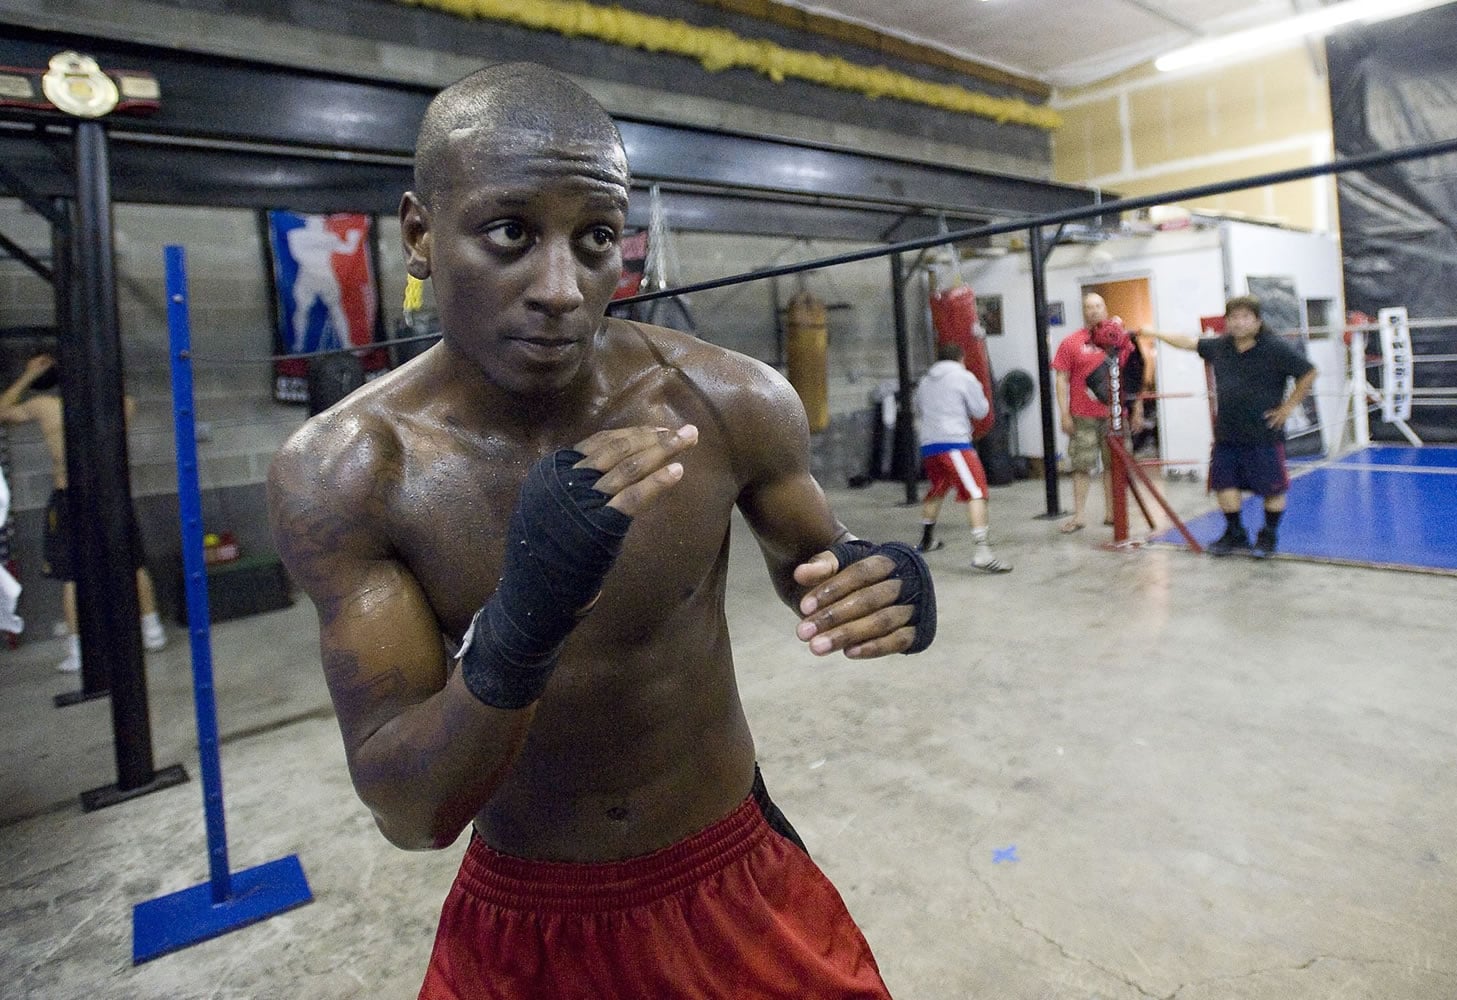 Virgil Green, who trains at Fisticuffs Gym, will have his fourth professional bout on Saturday.